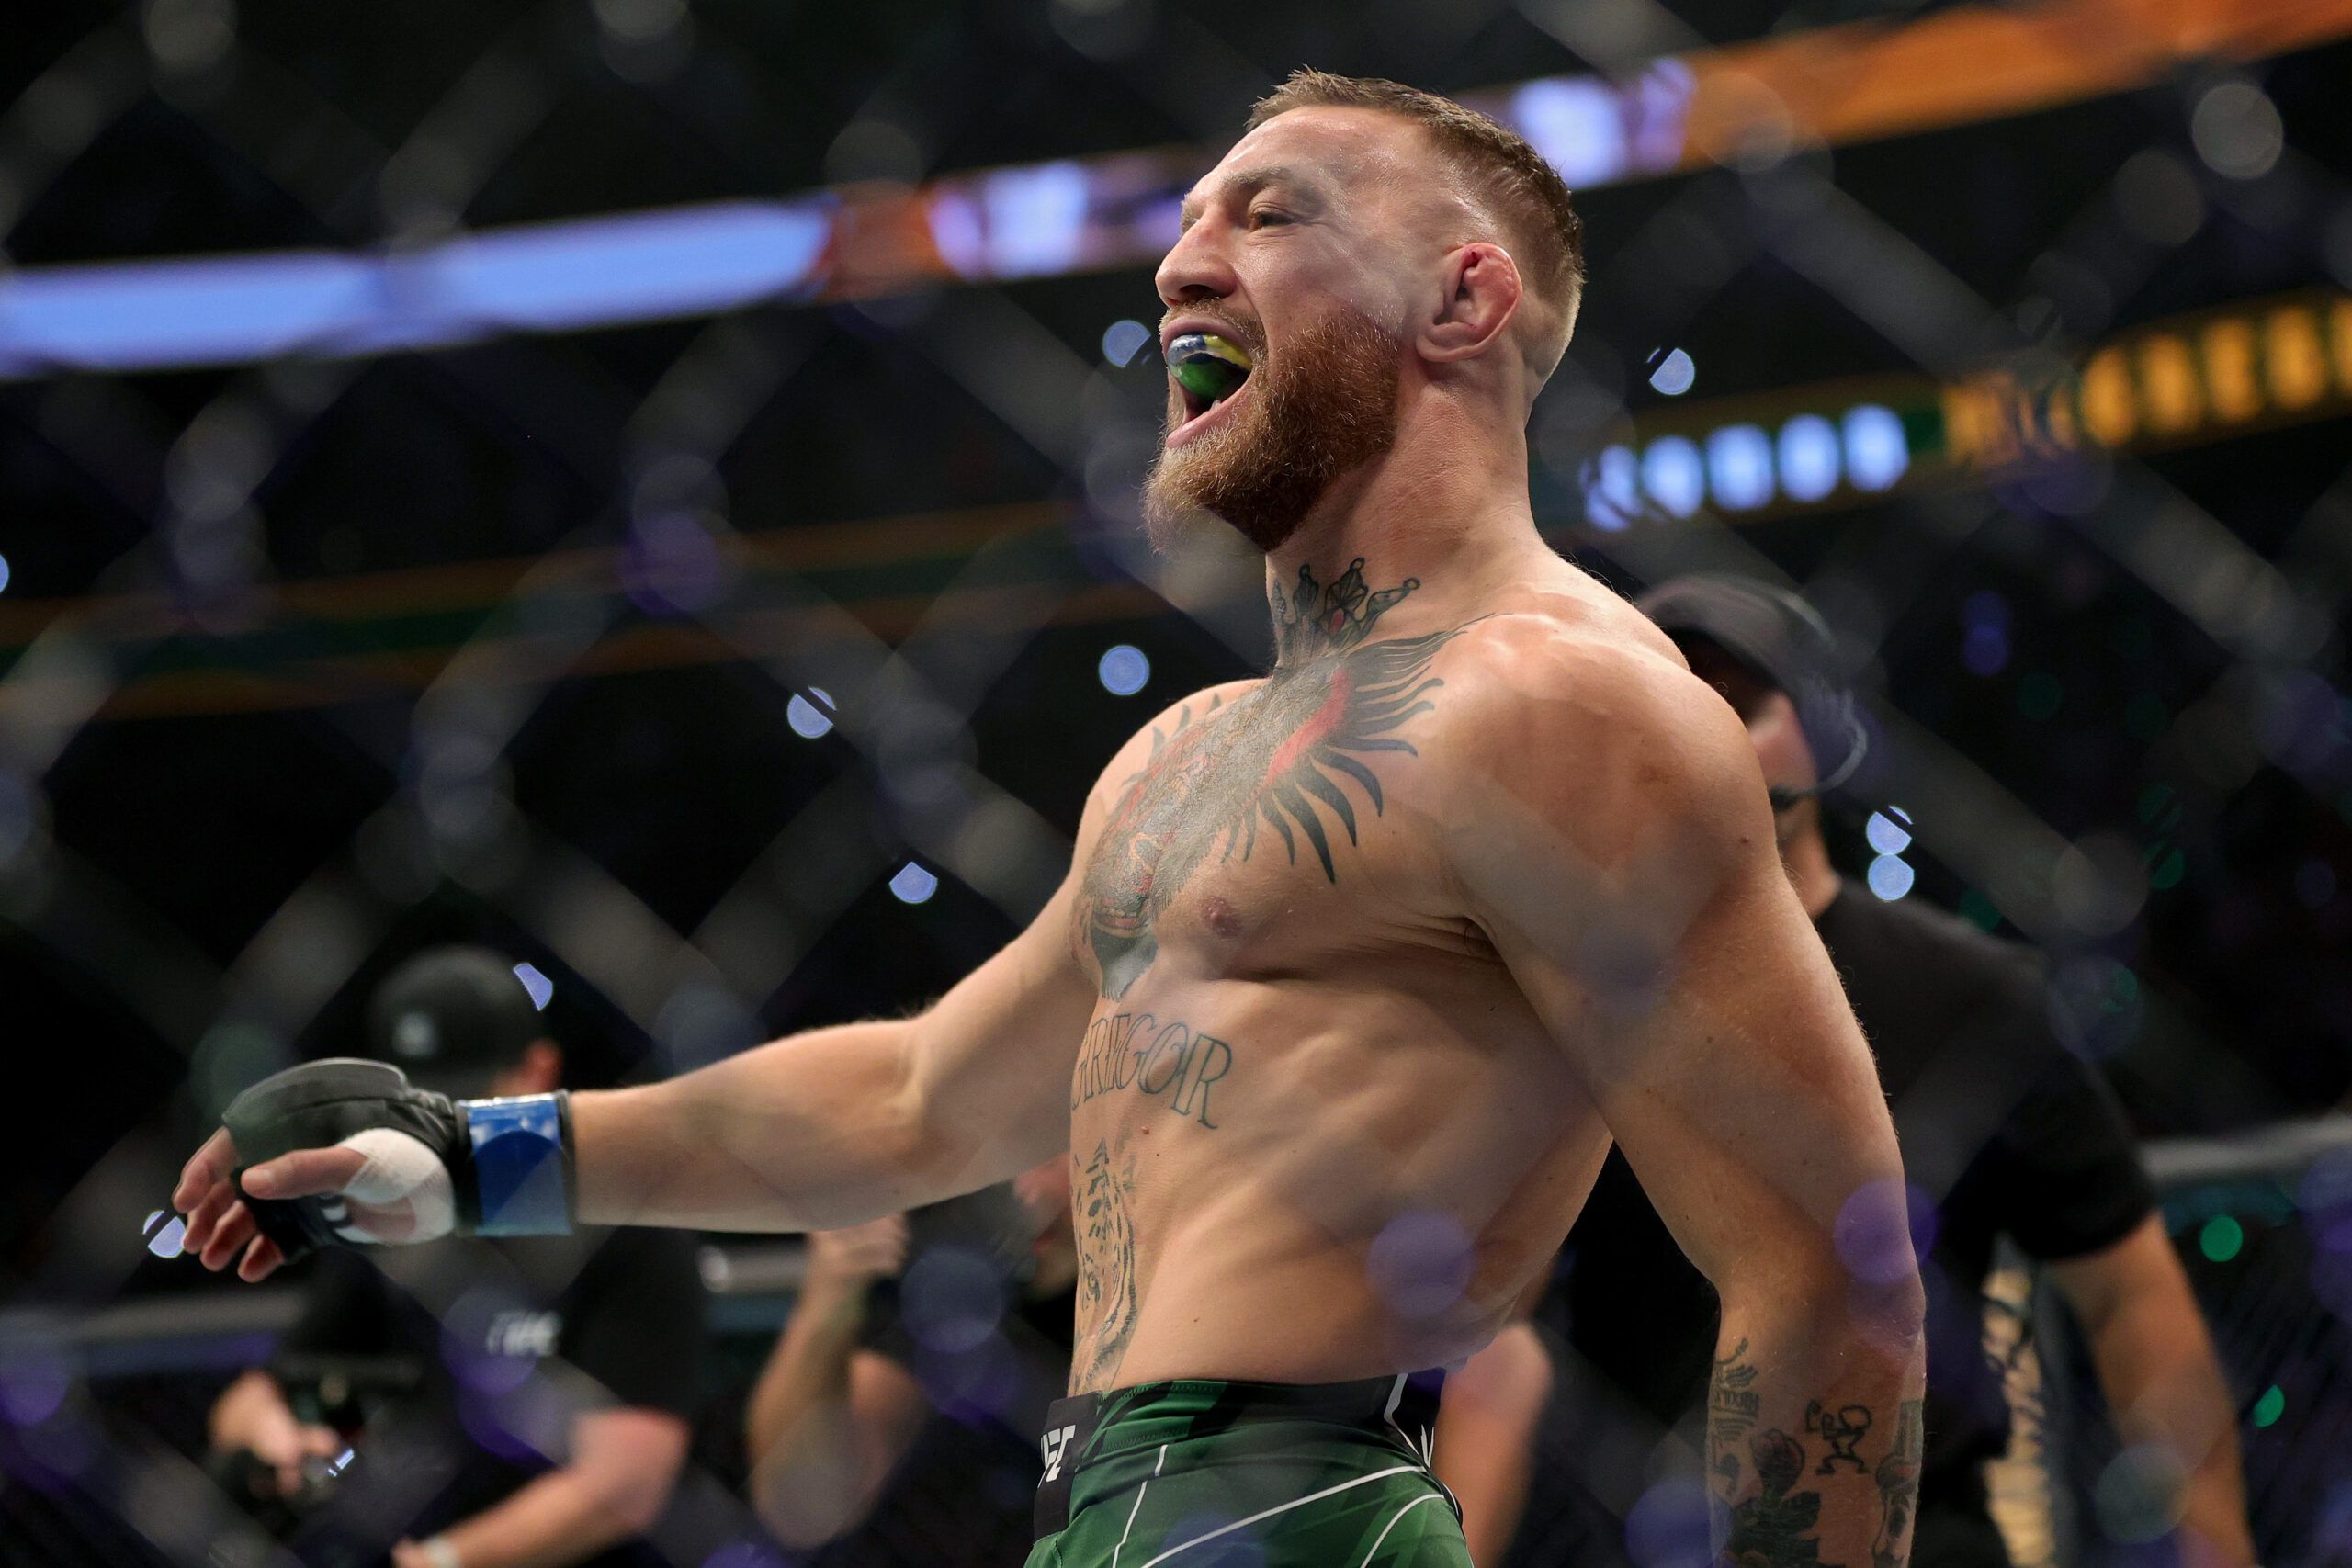 Conor McGregor strutting in the ring